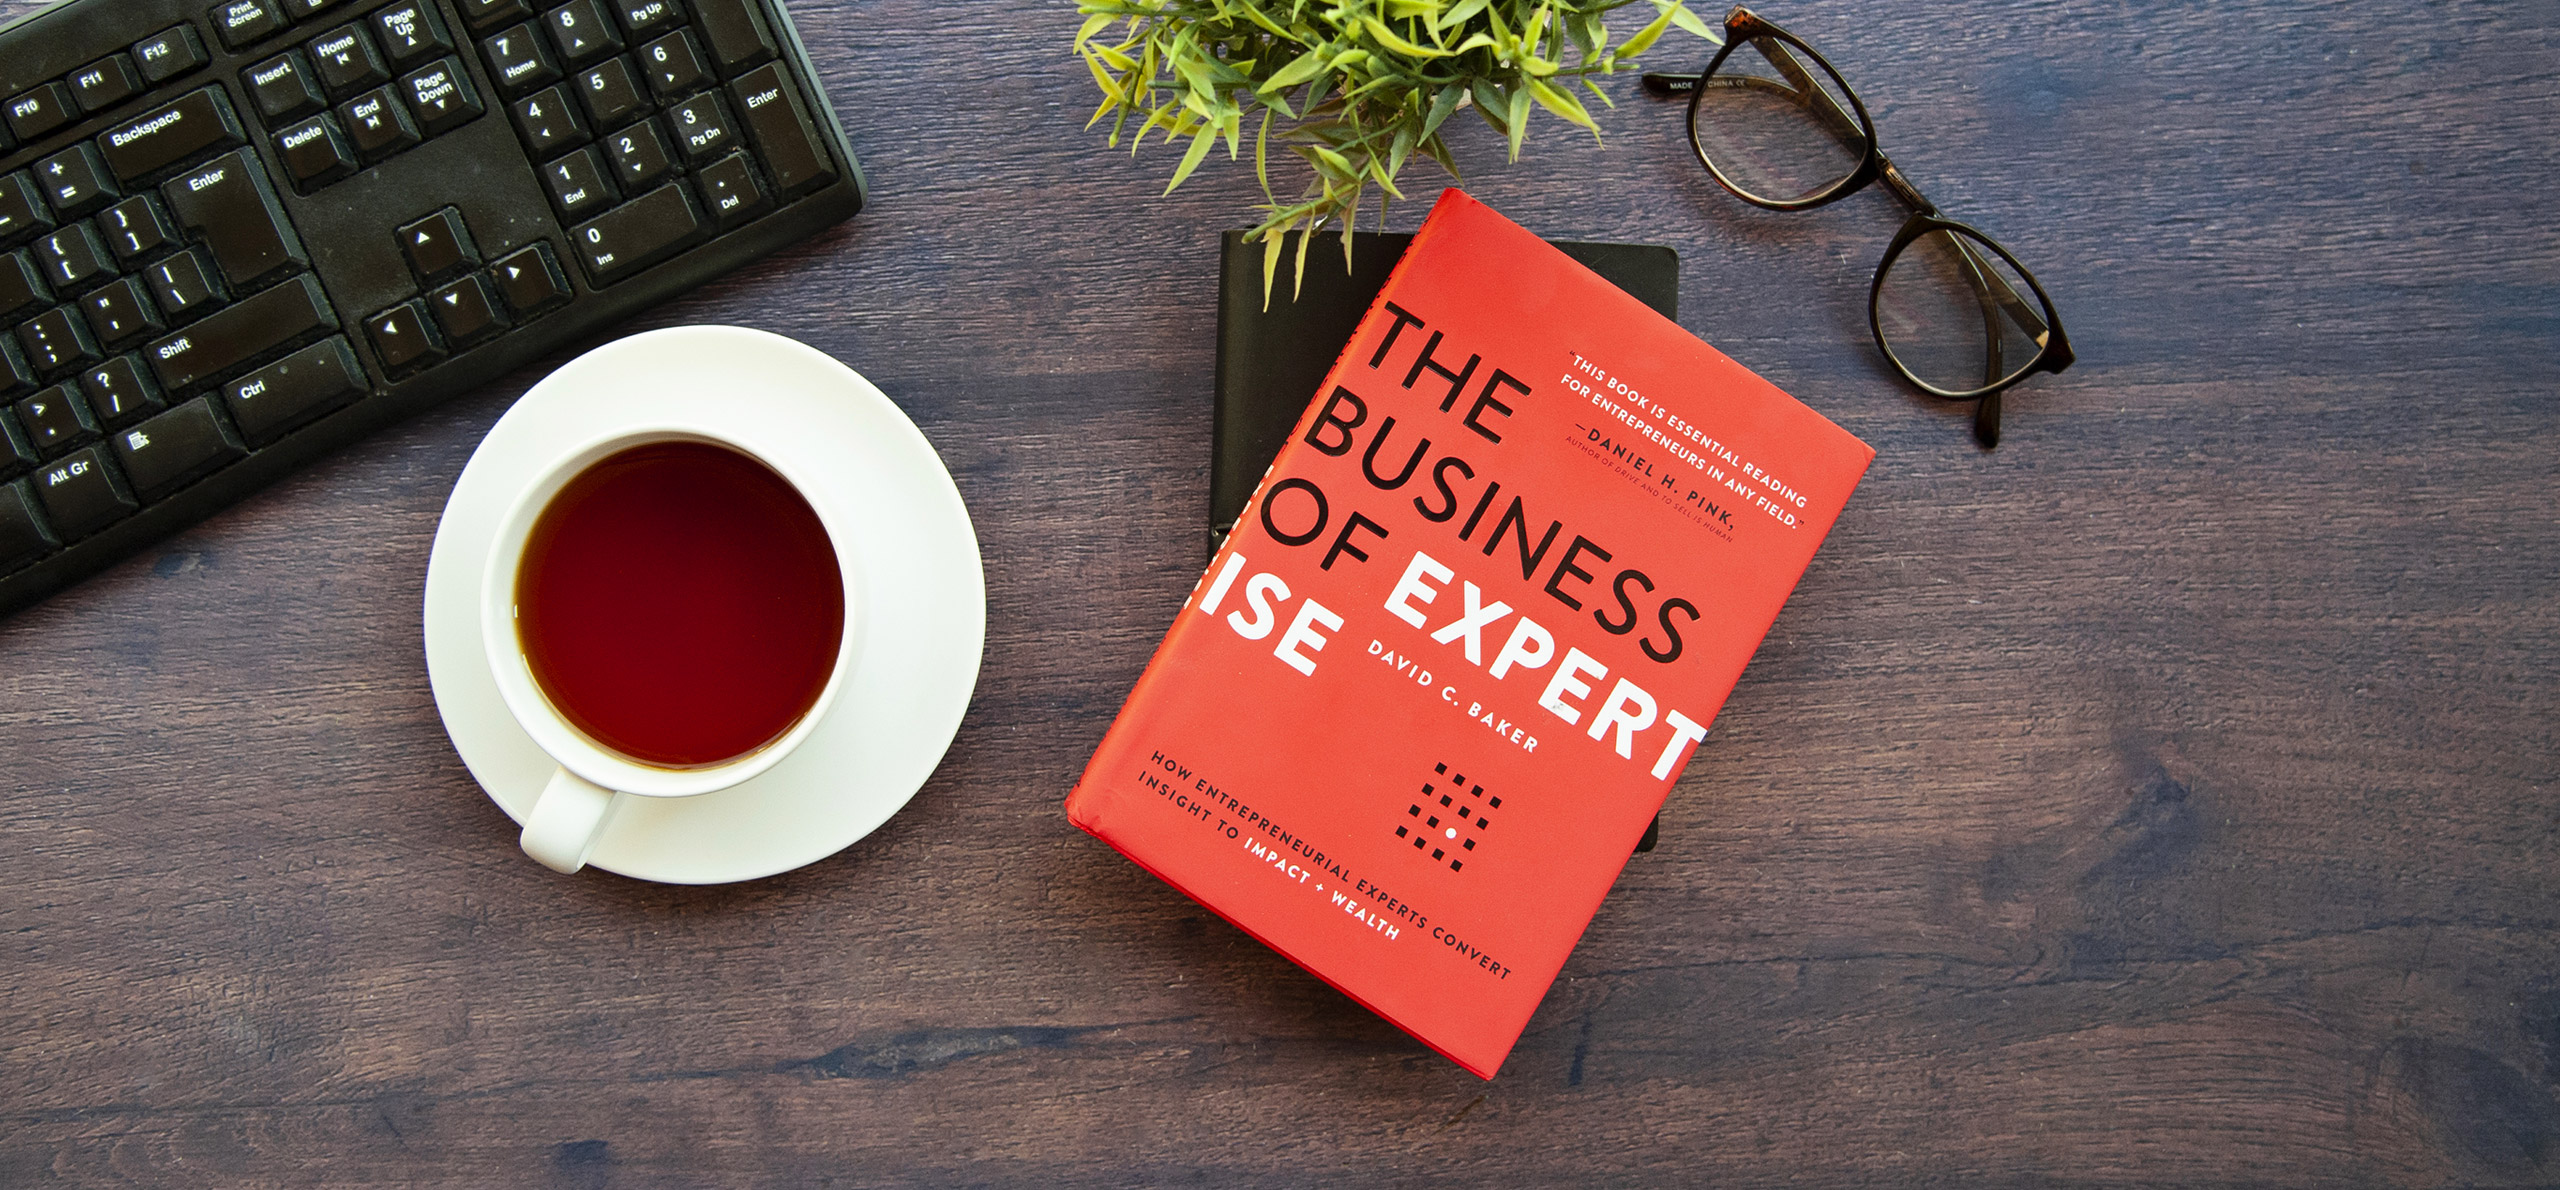 Insights on expertise from 'The Business of Expertise' by David C. Baker